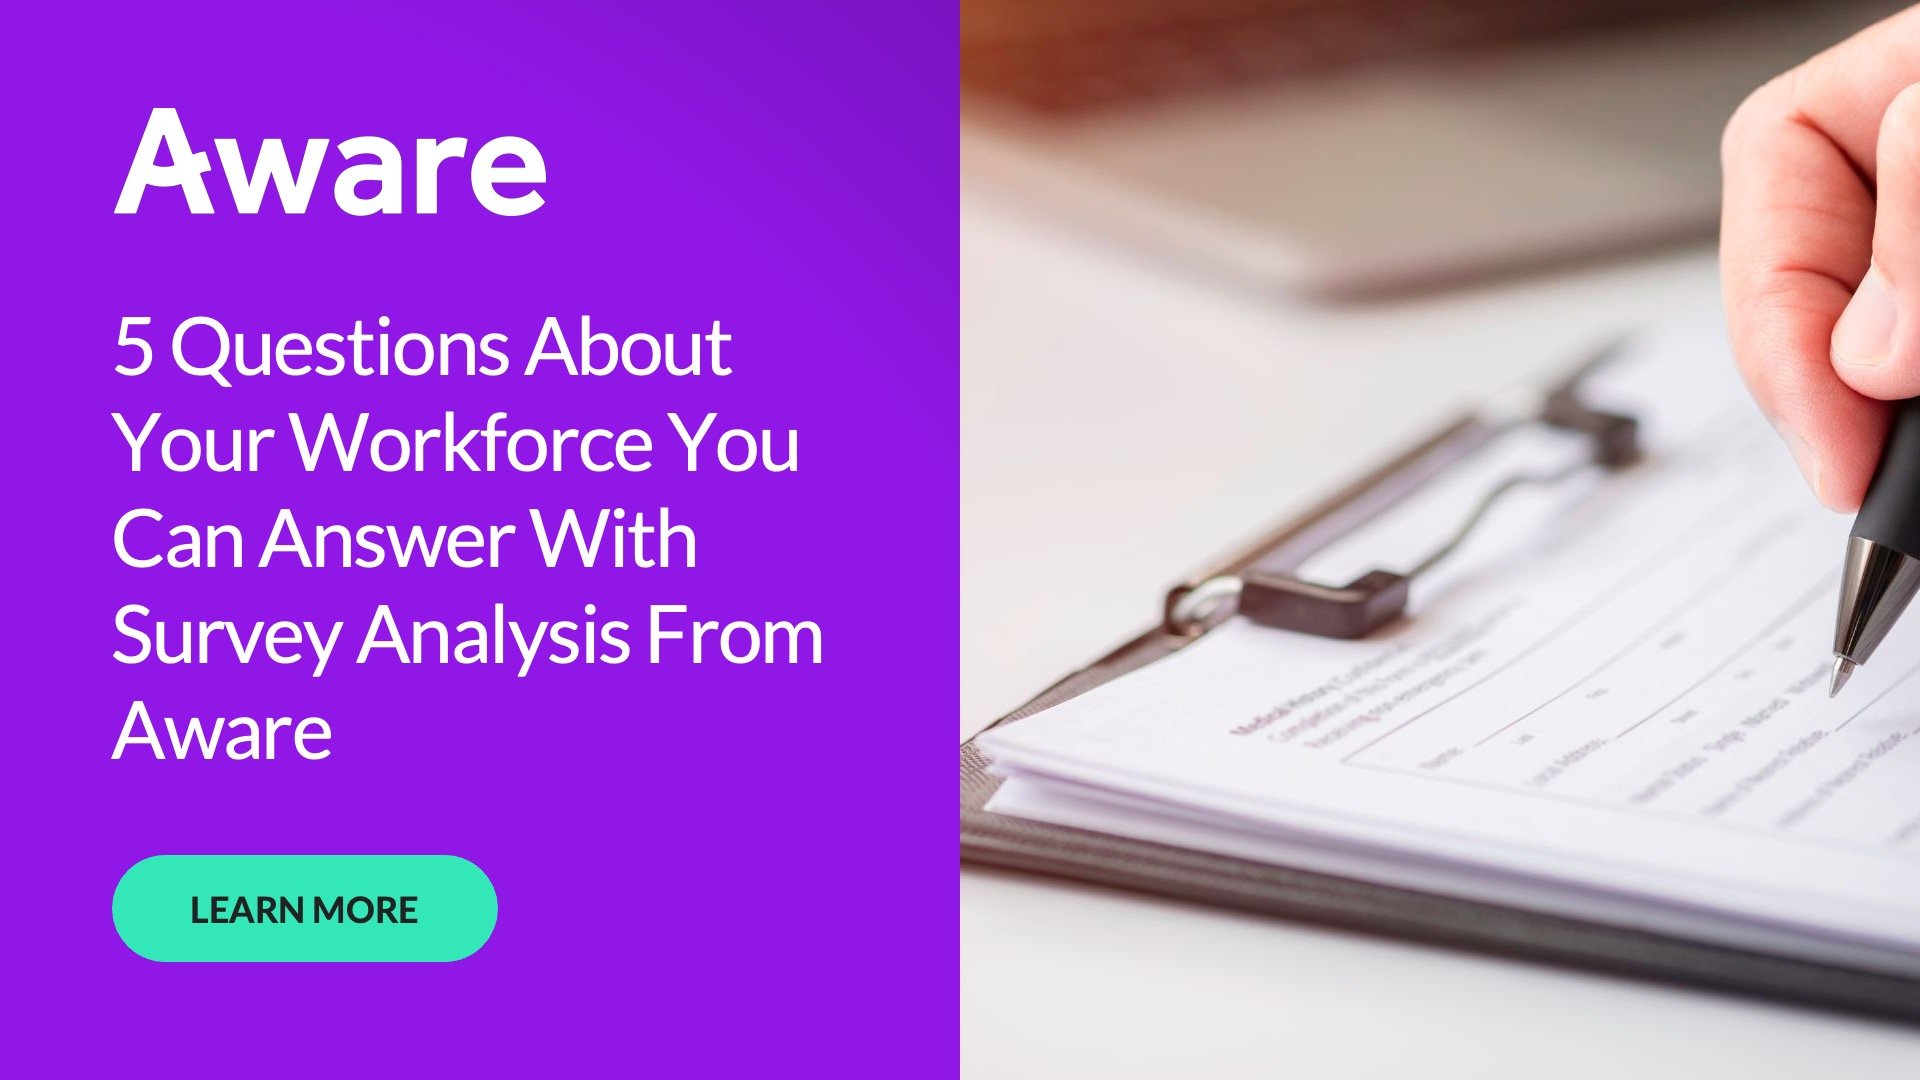 5 Questions About Your Workforce You Can Answer With Survey Analysis From Aware